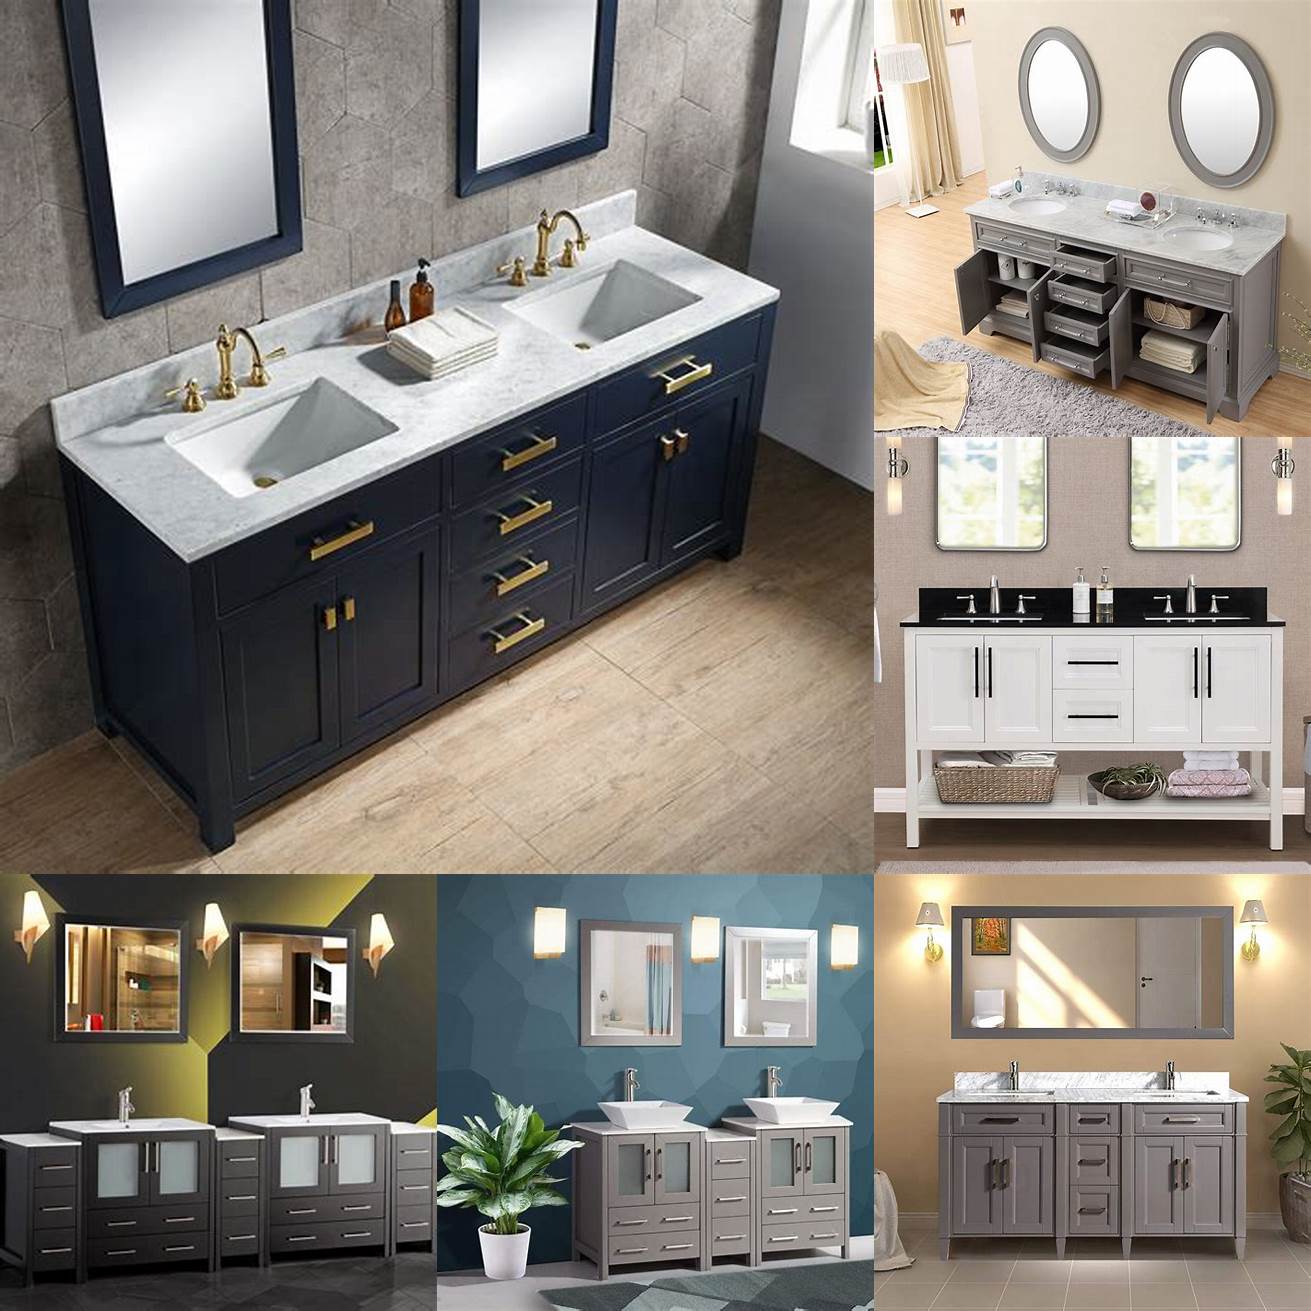 Space A dual sink bathroom vanity requires more space than a single sink vanity so it may not be suitable for smaller bathrooms